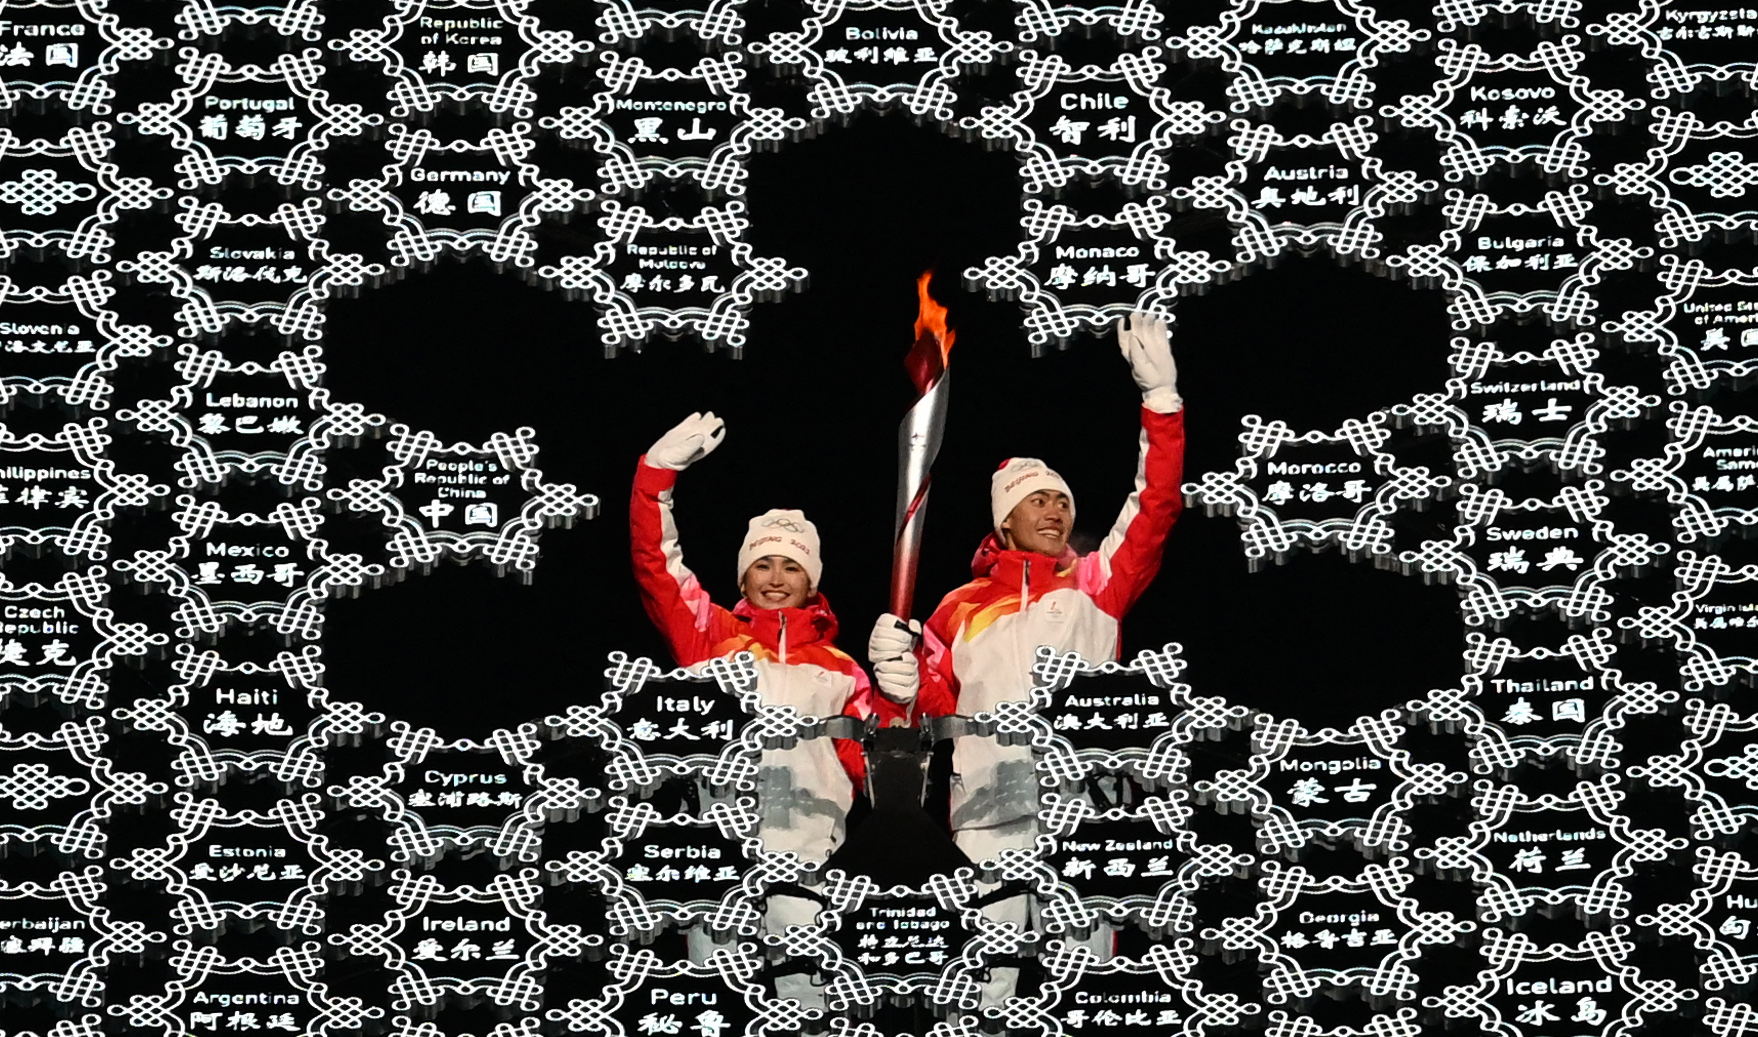 Chinese torchbearers Dinigeer Yilamujian (L) and Zhao Jiawen wave with the Olympic flame in the middle of a giant snowflake during the Opening Ceremony of the Beijing 2022 Winter Olympic Games.